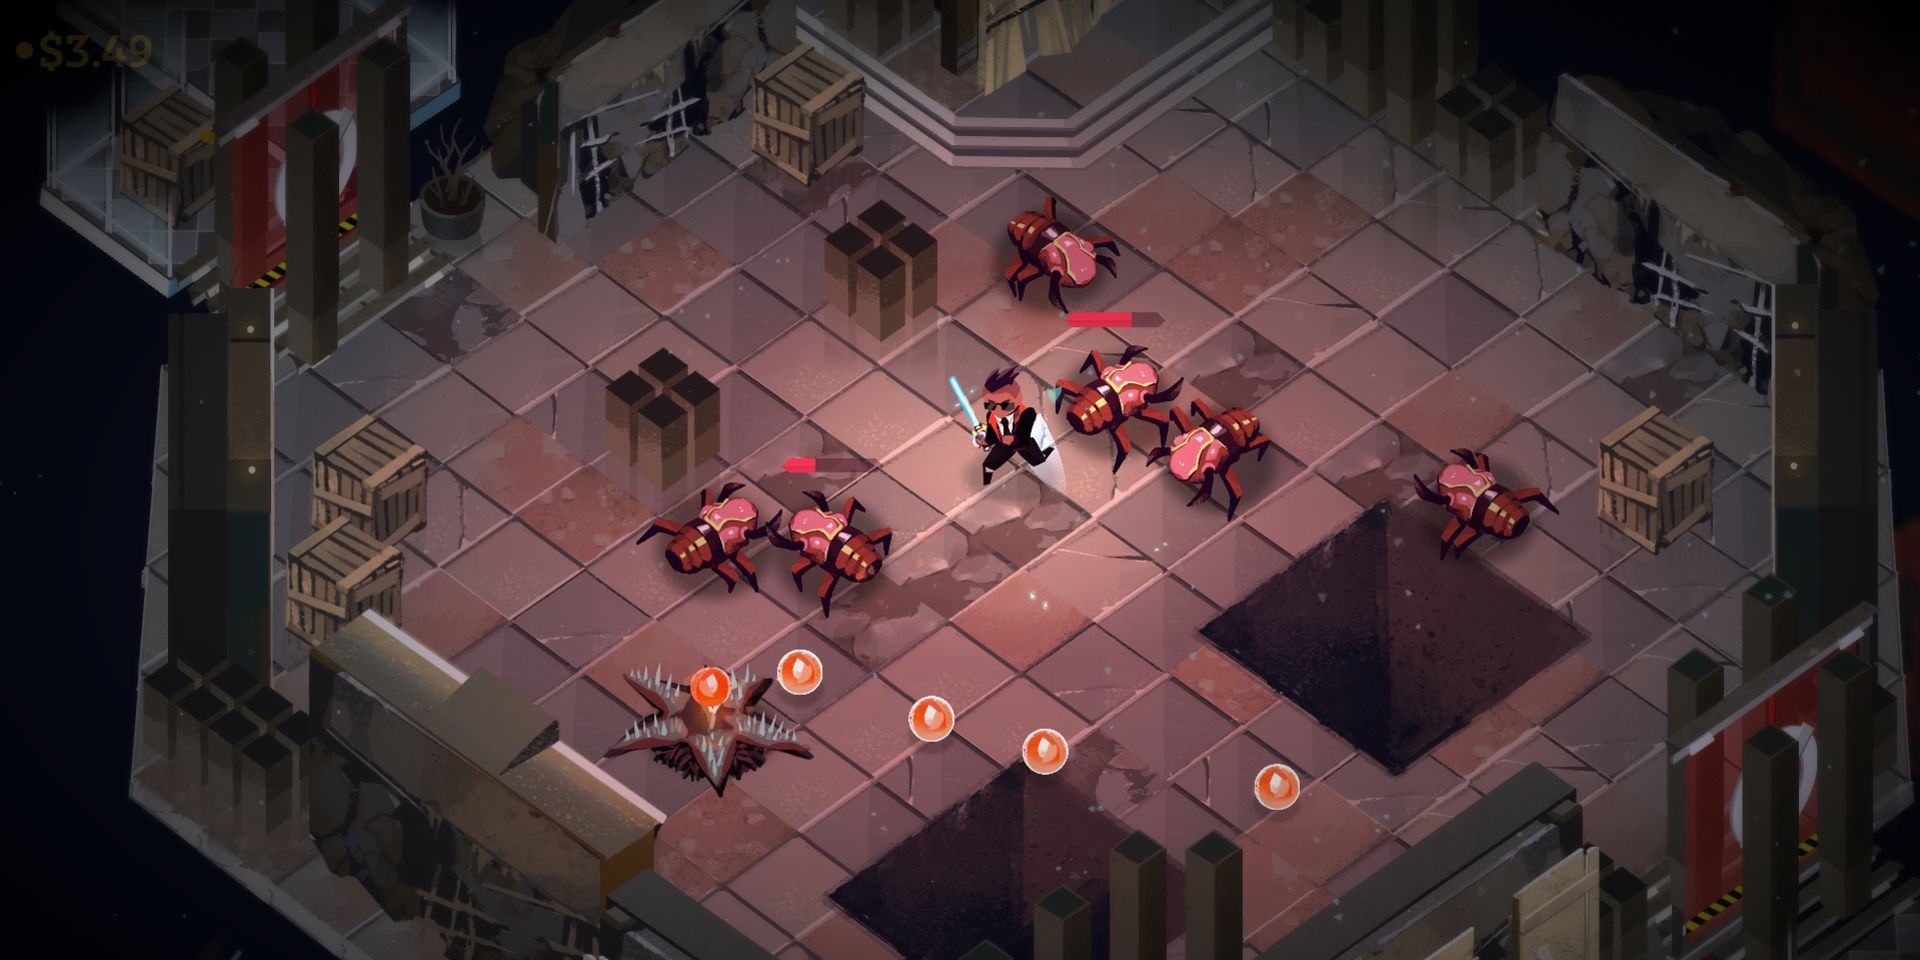 Isometric view of combat against insect-like enemies in roguelike dating sim Boyfriend Dungeon.